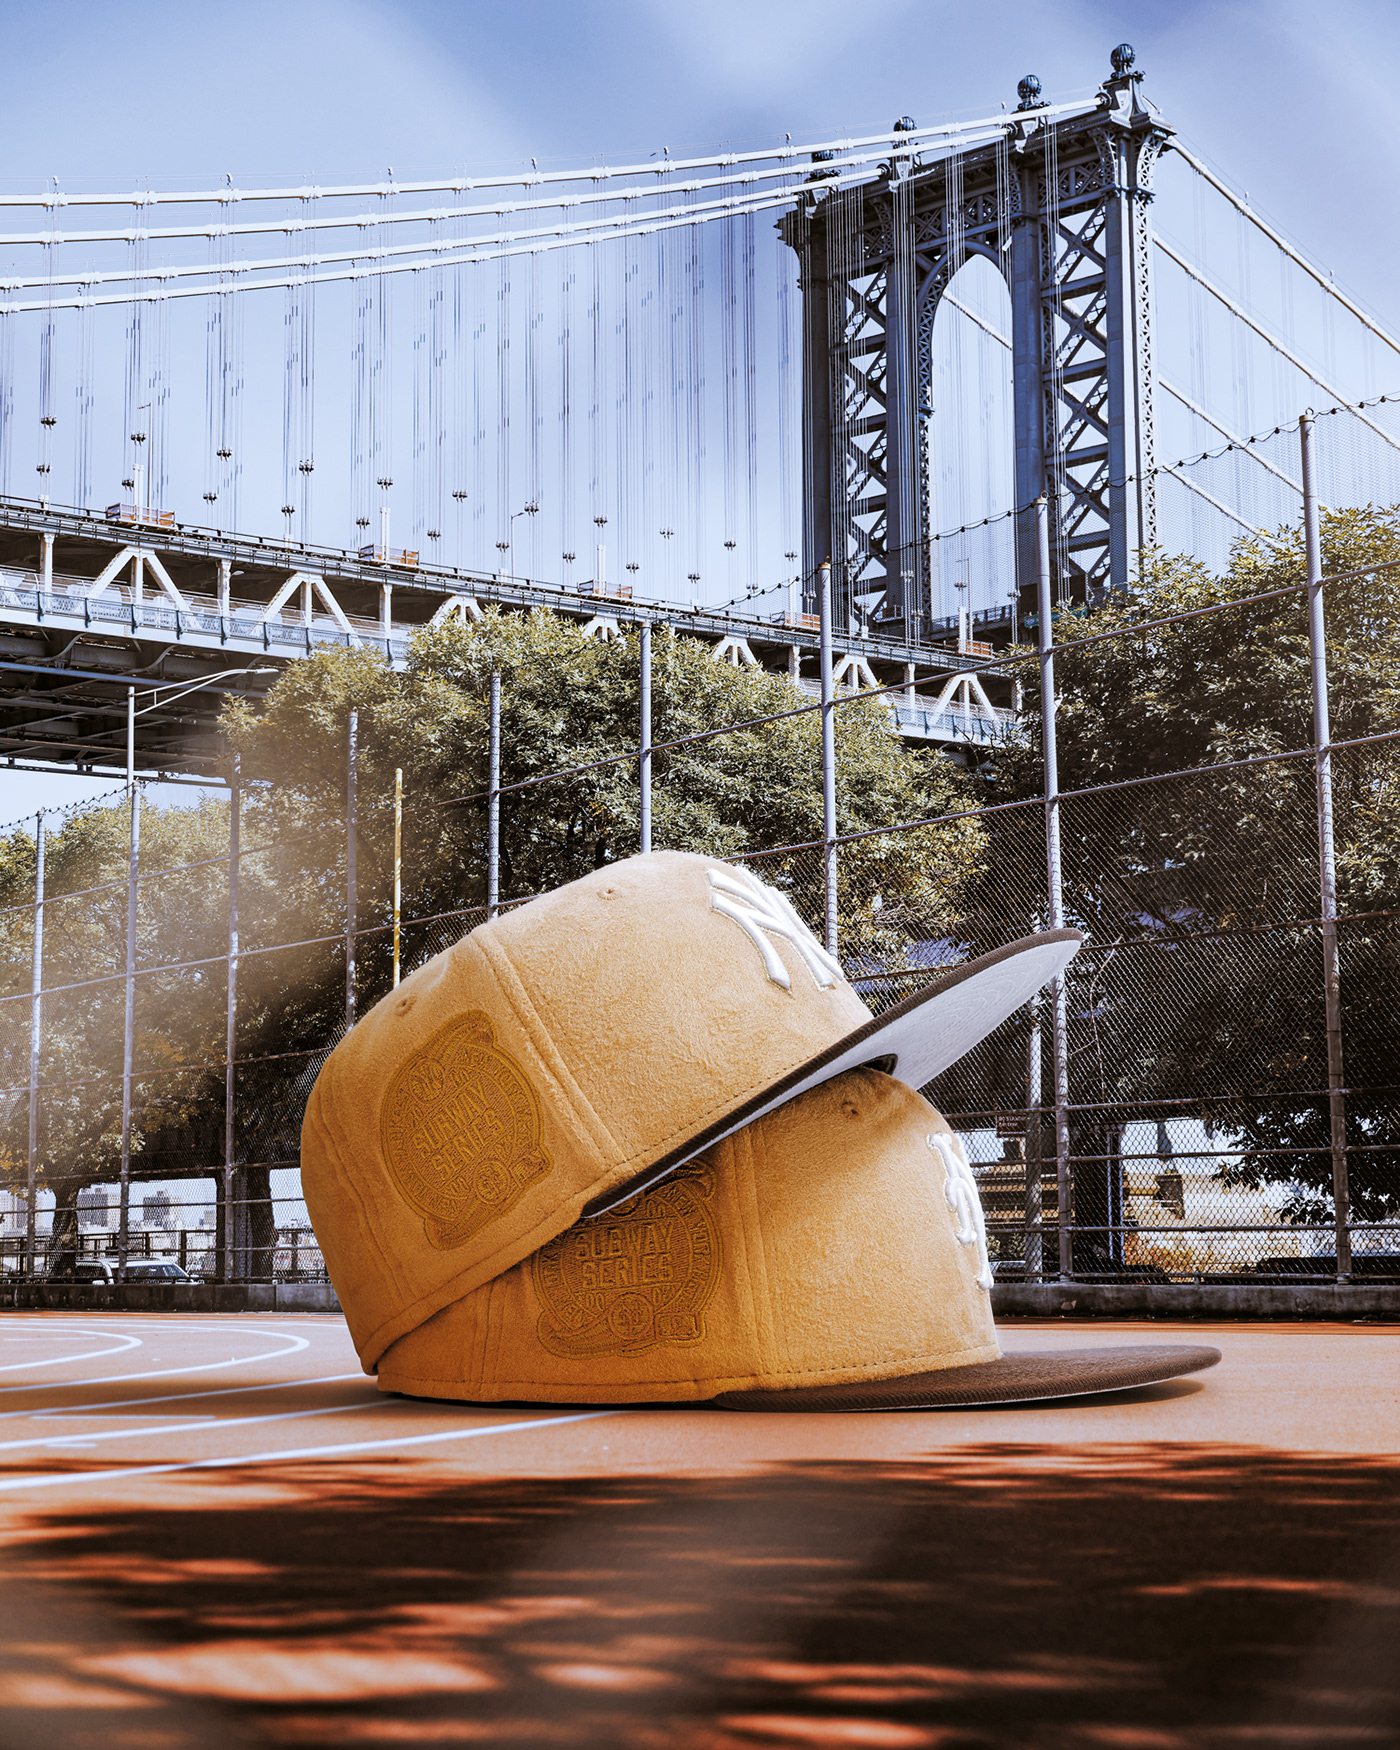 Giant hat photo composite. retouching and image manipulation done with photoshop